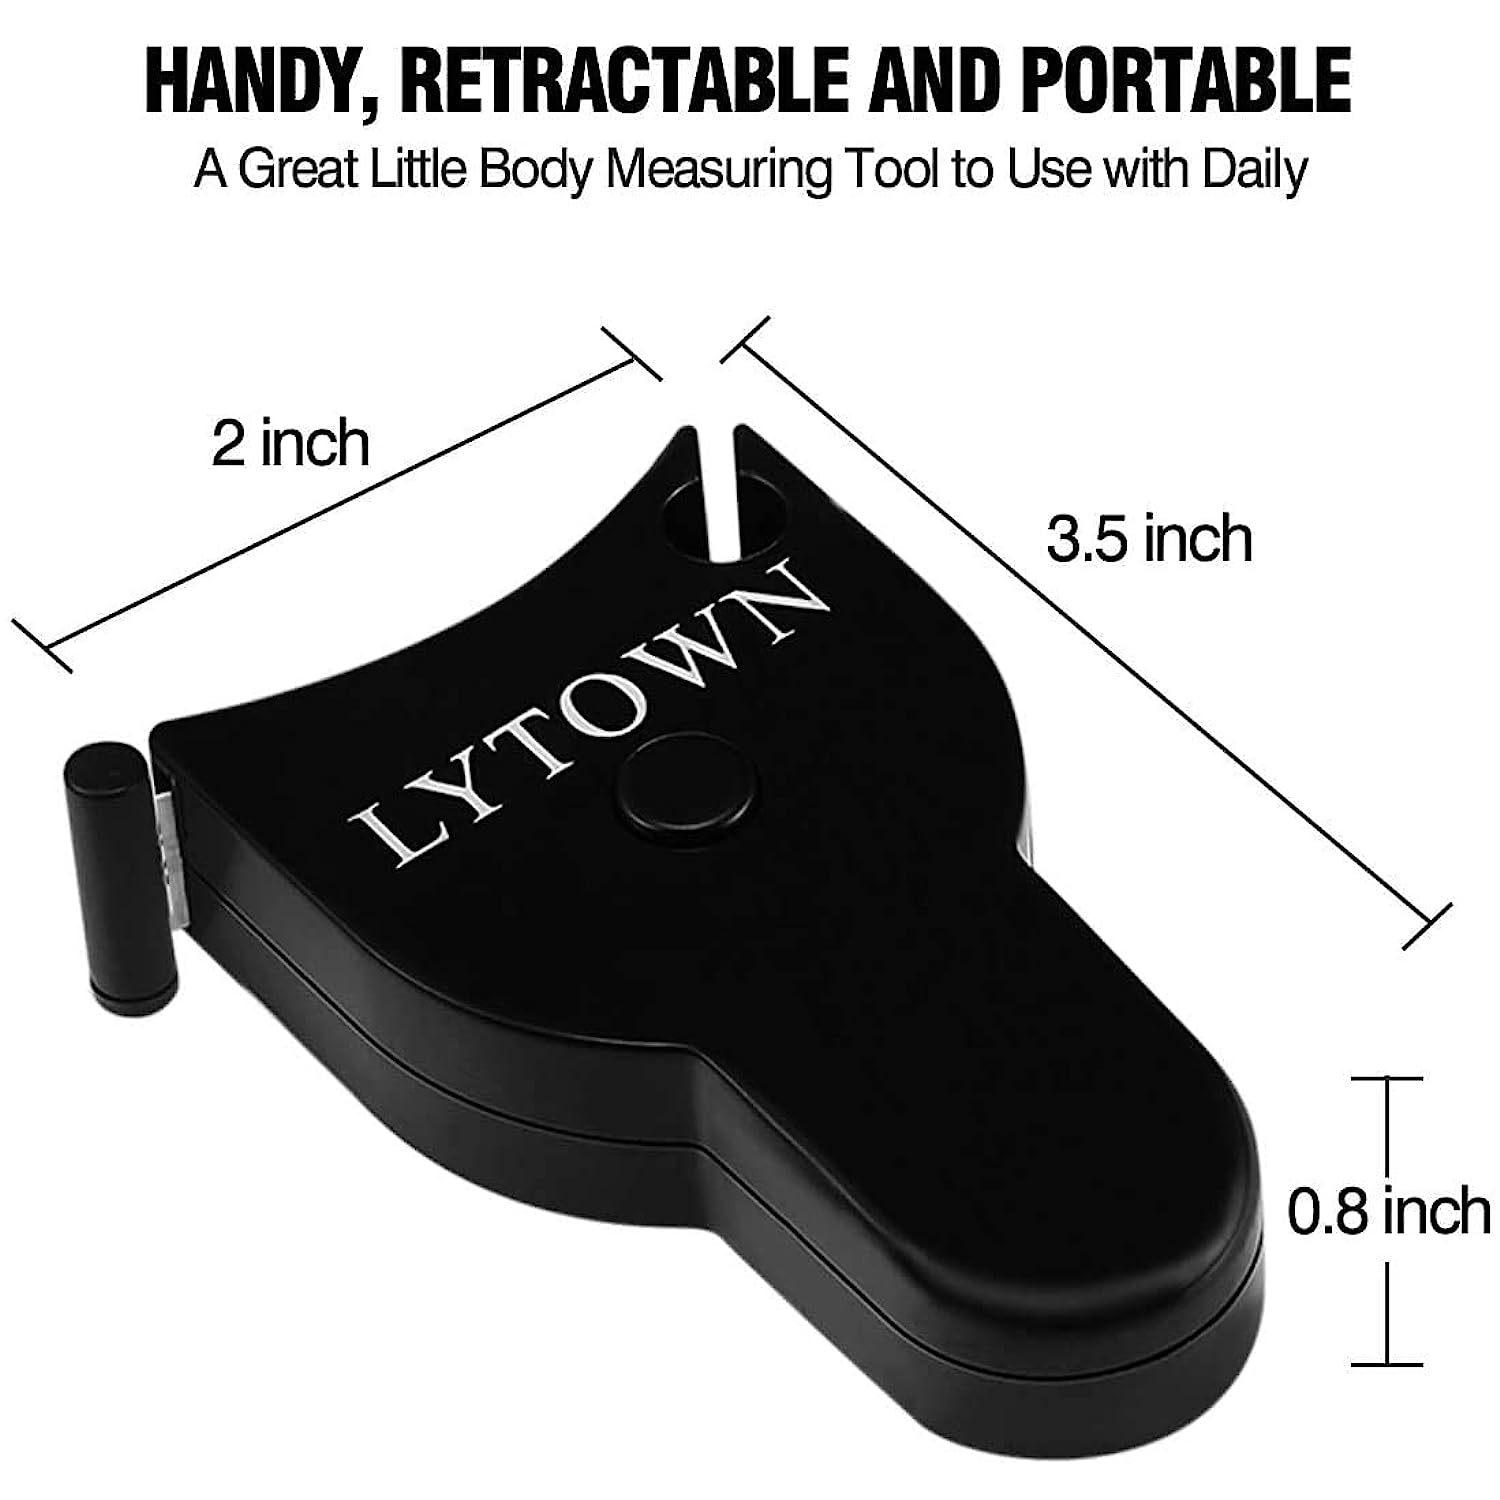 LYTOWN 2pcs Tape Measure Body Measuring Tape 60inch (150cm) Retractable Measuring Tape for Body Measurement & Weight Loss Accurate Body Tape Measu